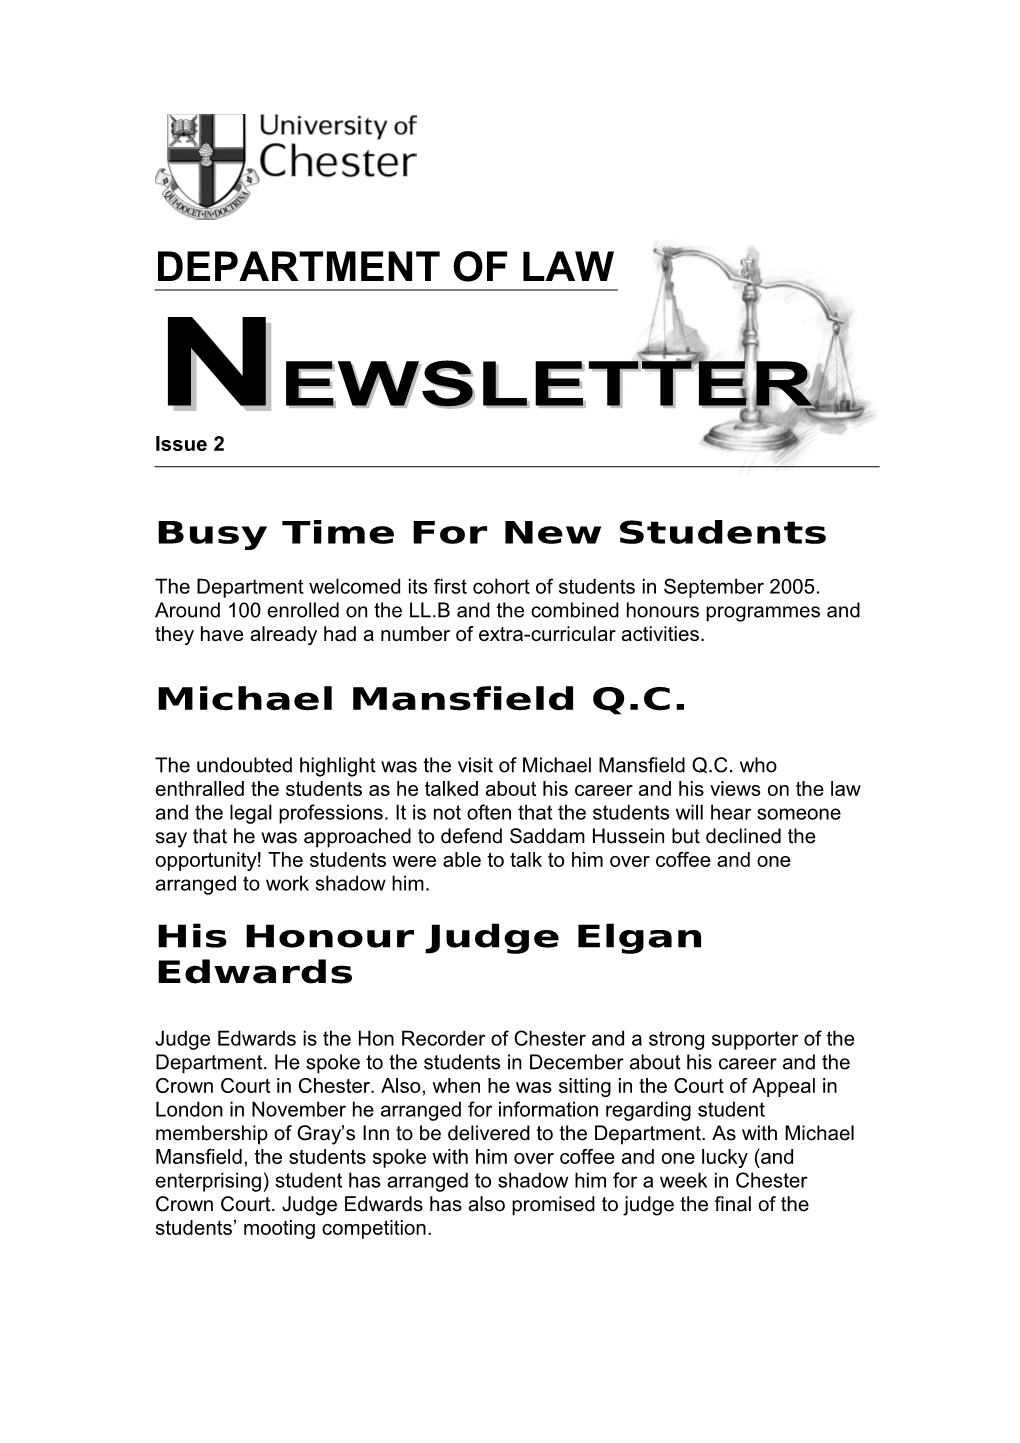 Department of Law Newsletter